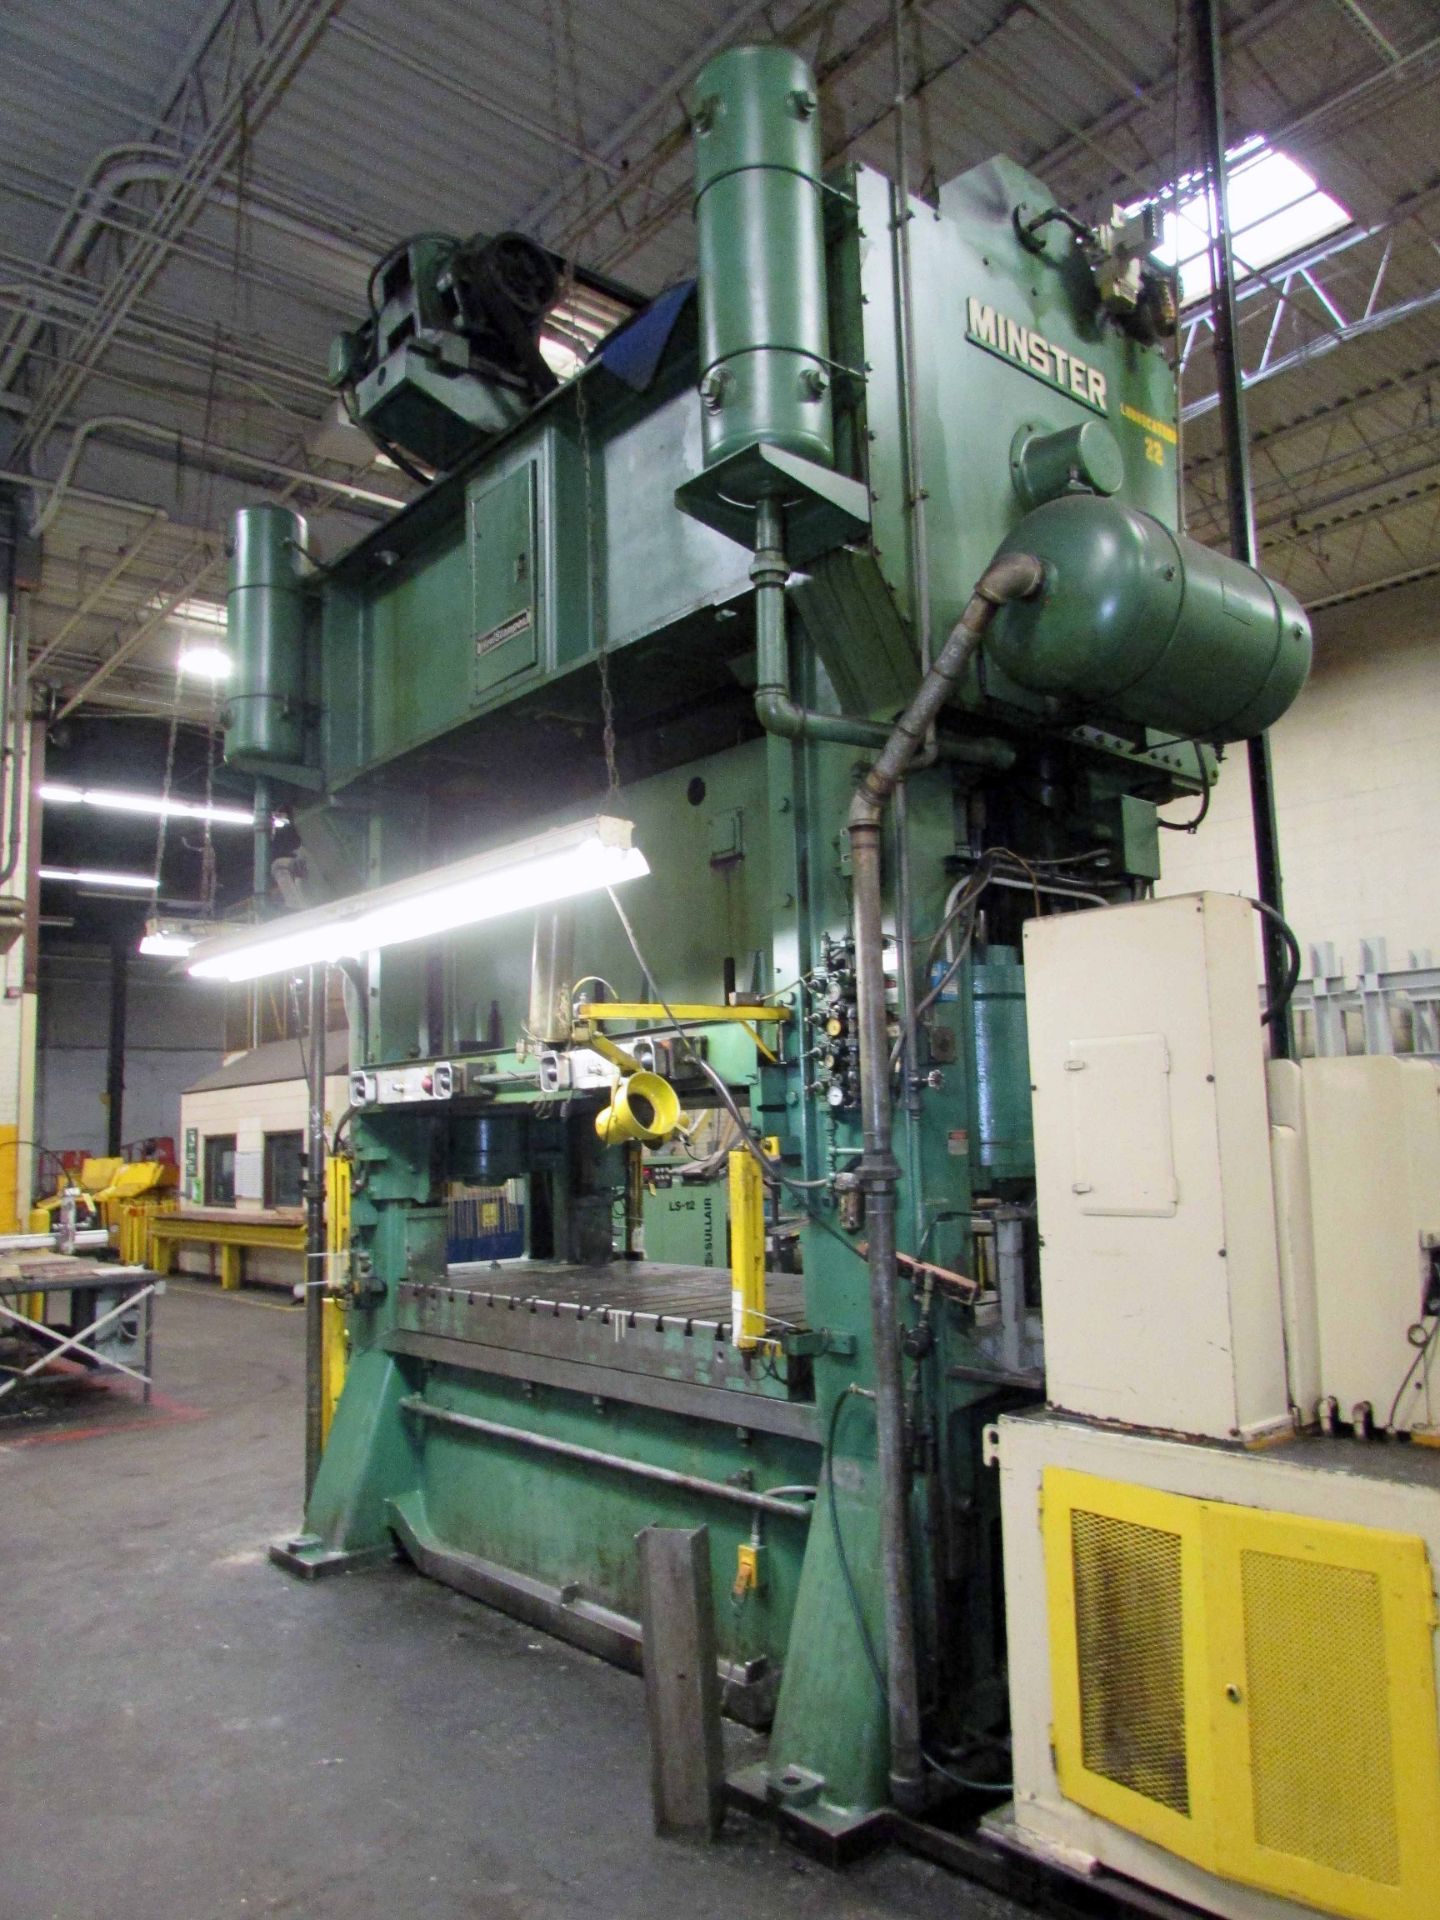 STRAIGHT SIDE 2-POINT ECCENTRIC GEARED PRESS, MINSTER 300 T. CAP. MDL. E2-300-96-48 “HEVI-STAMPER” - Image 10 of 23